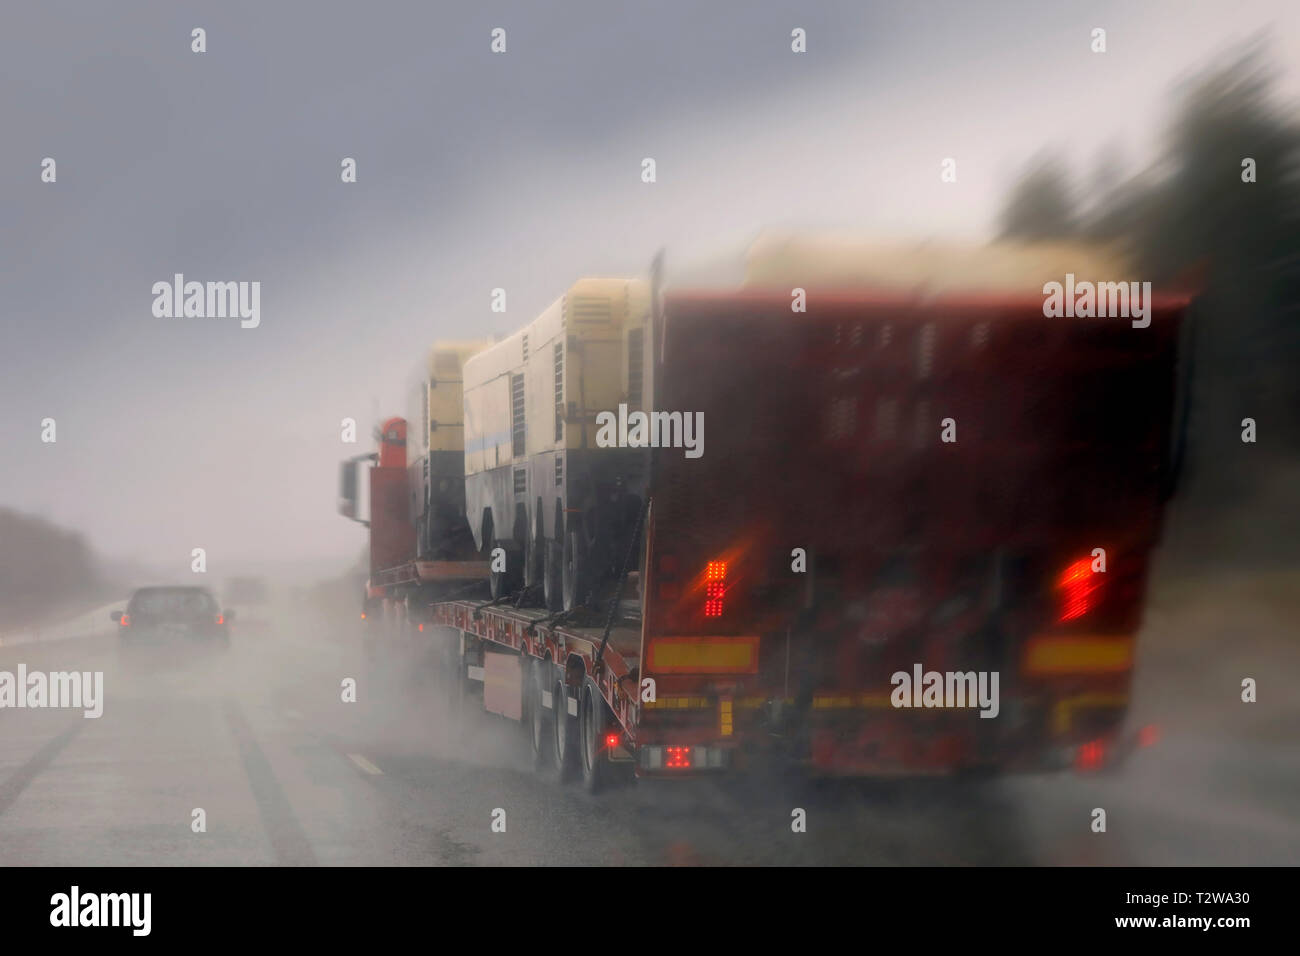 Driving along highway in rain and passing a semi truck with a load of machinery, rainwater splashing, blurred view. Stock Photo